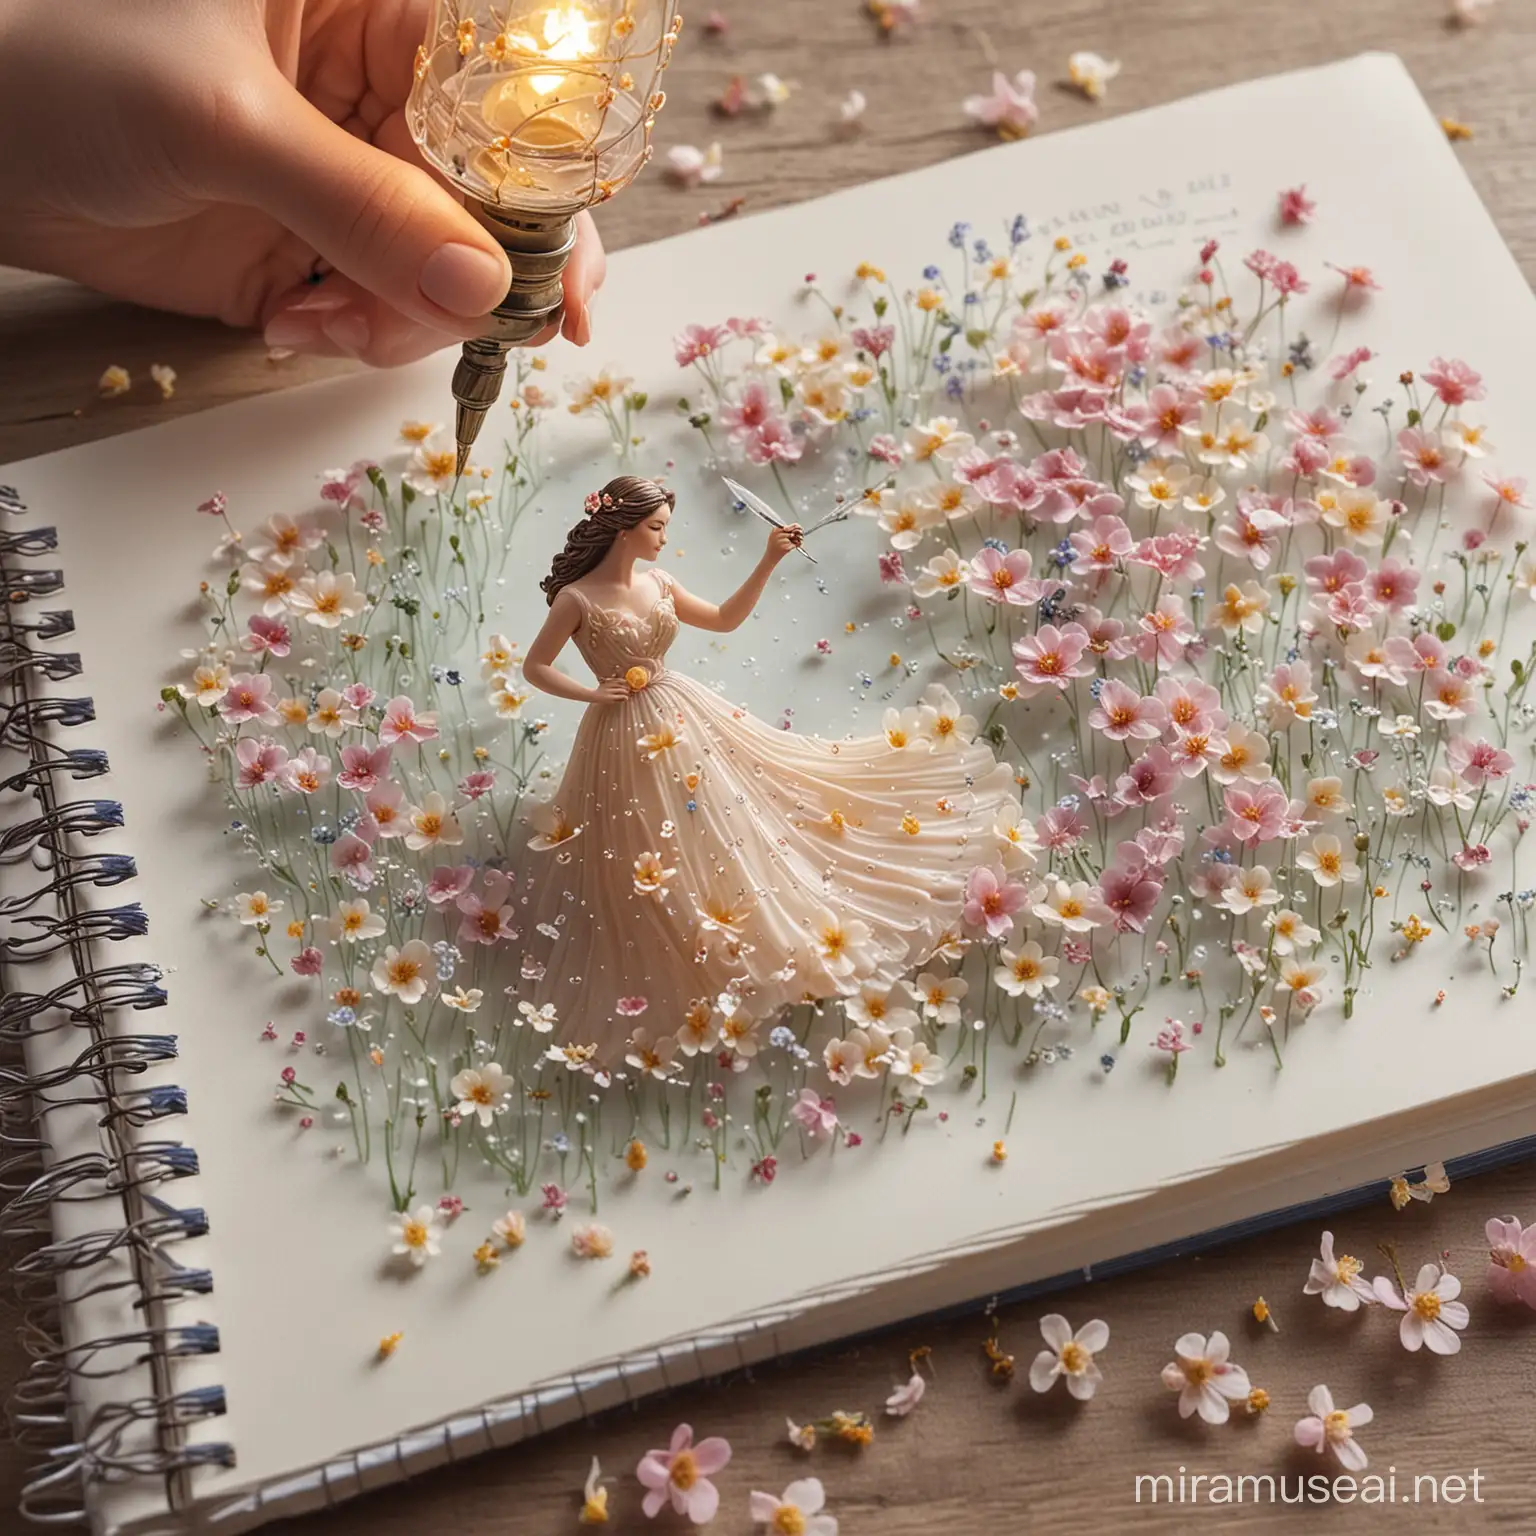 Writer is holding a resin see through pen with beautiful soft coloured tiny flowers the flowers are spilling from the inside and out of the tip of the pen. The flowers flowing in a stream out of the pen tip forms a beautiful woman in a flowing dress landing on the page of a notebook photo realistic detailed. There is a lamp besides notebook